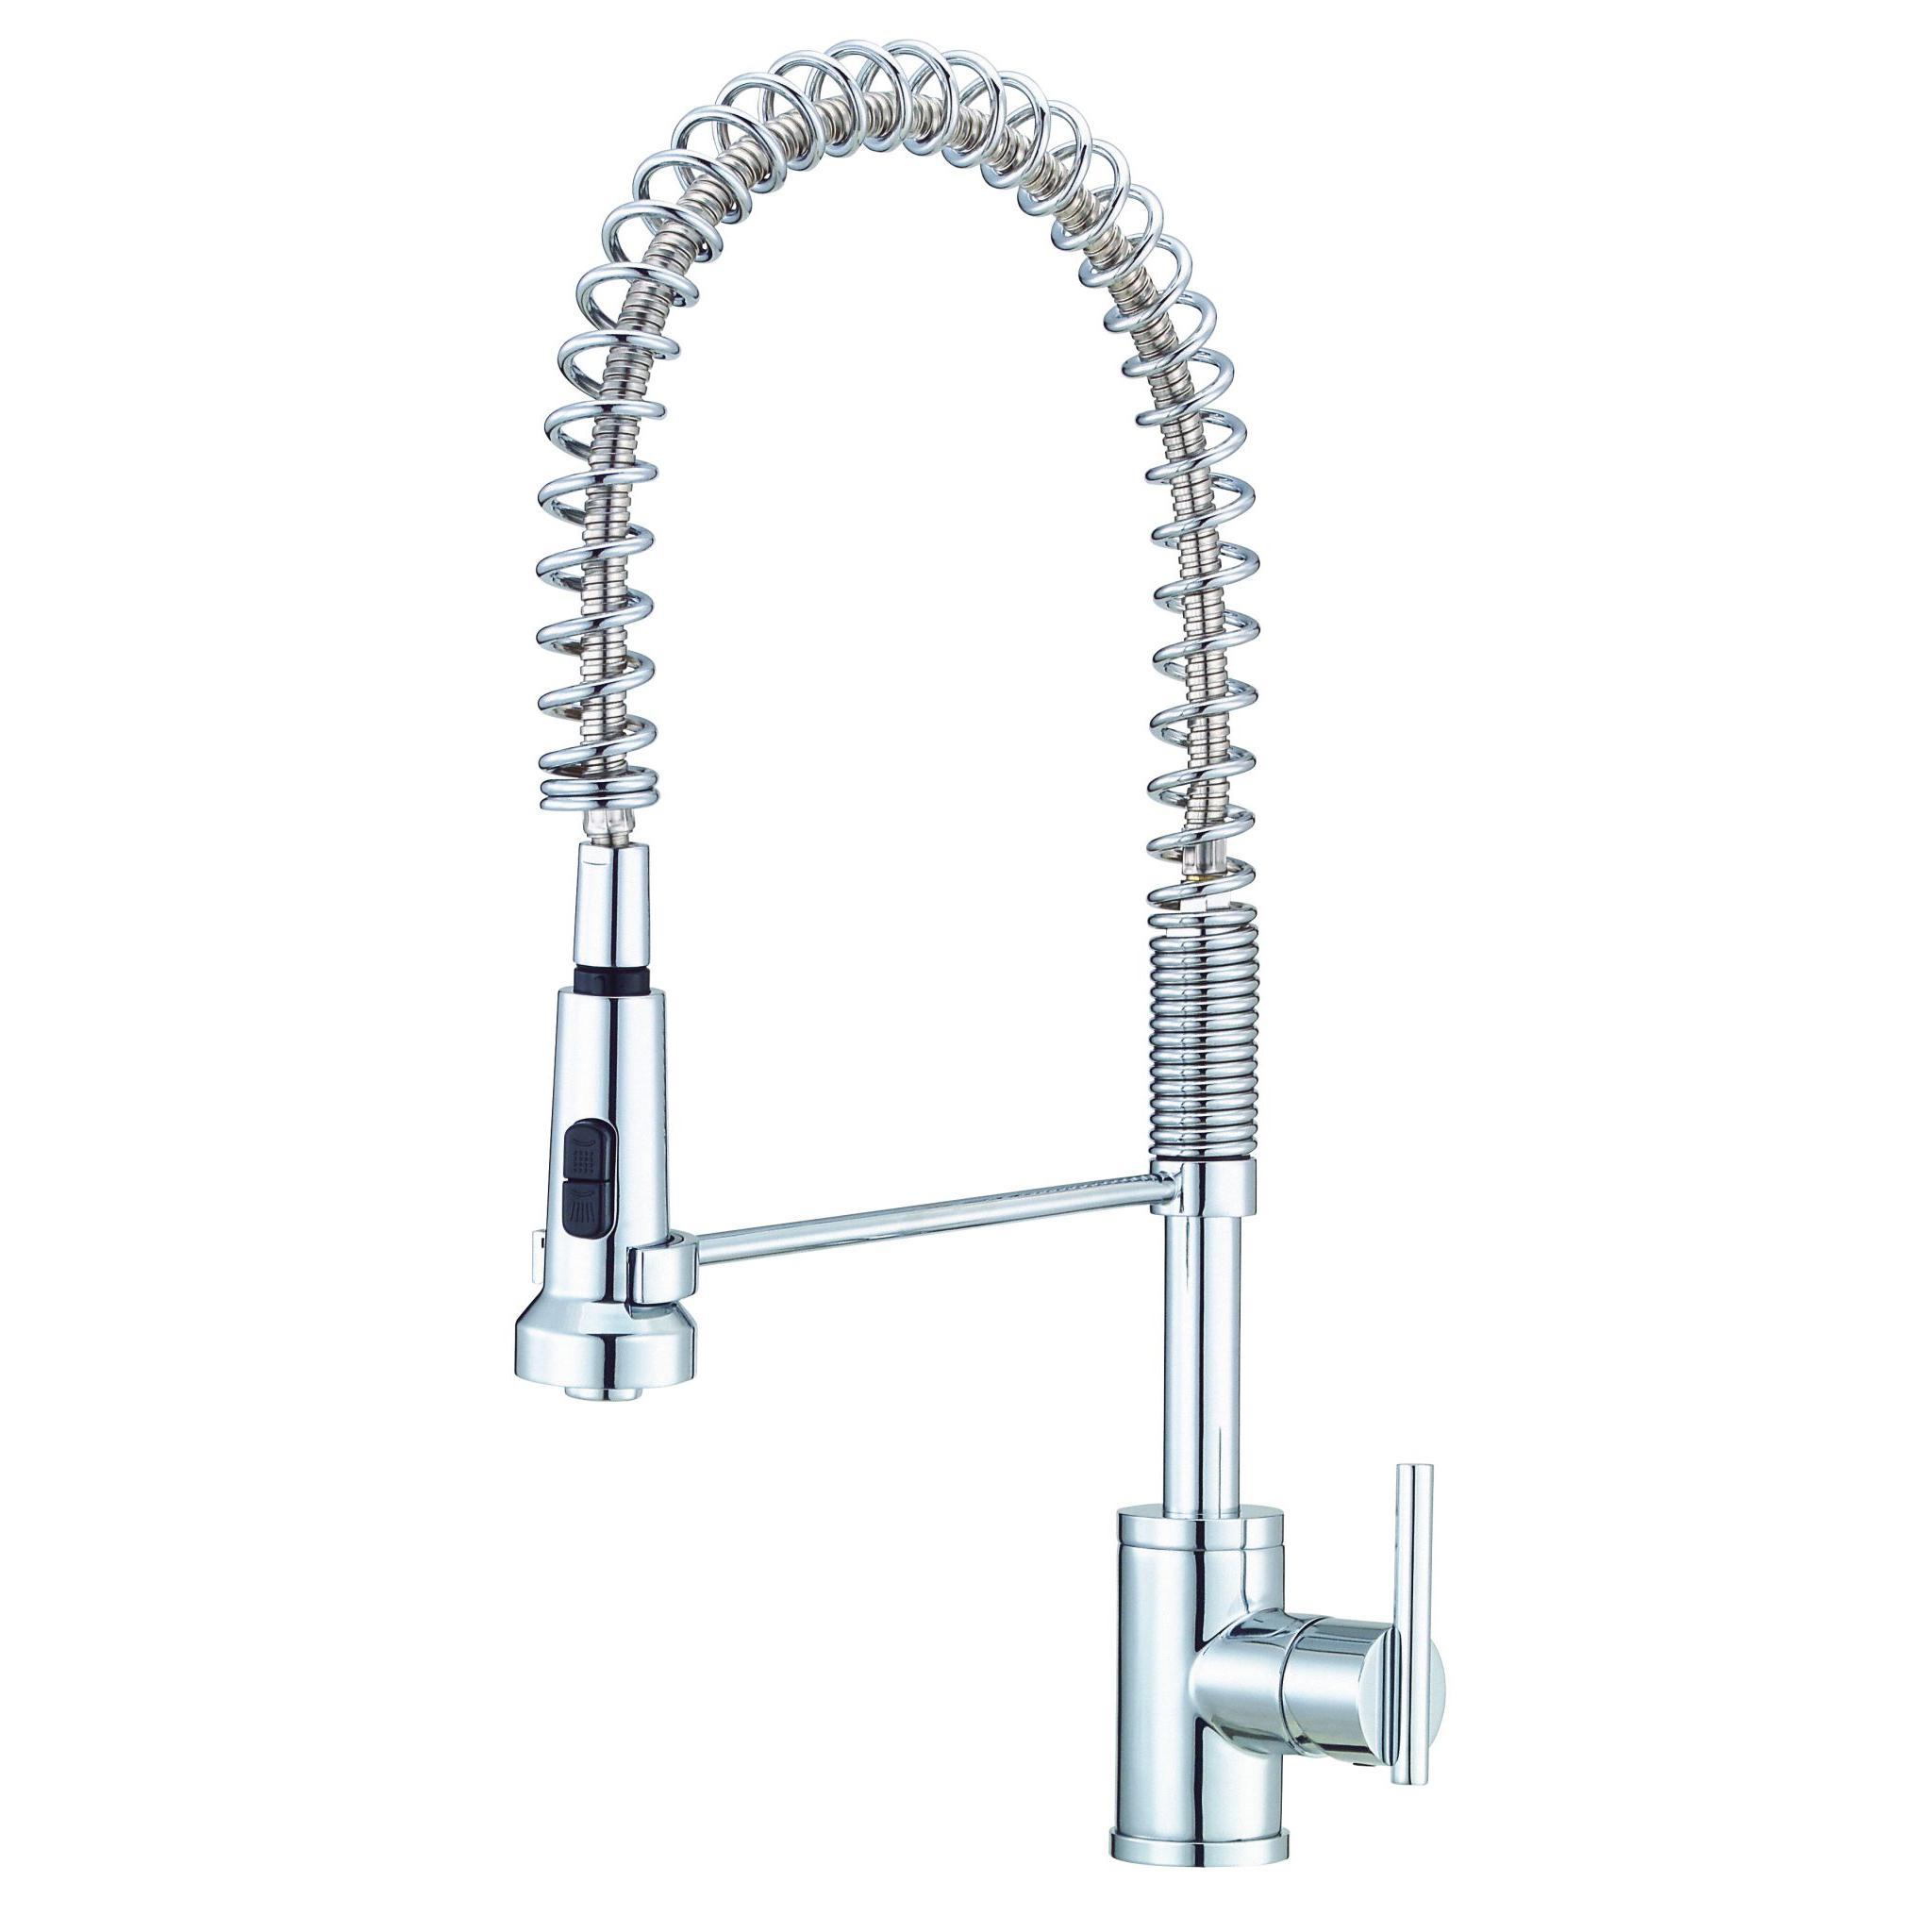 Image of the Gerber Parama faucet that home builders can earn rebates on.